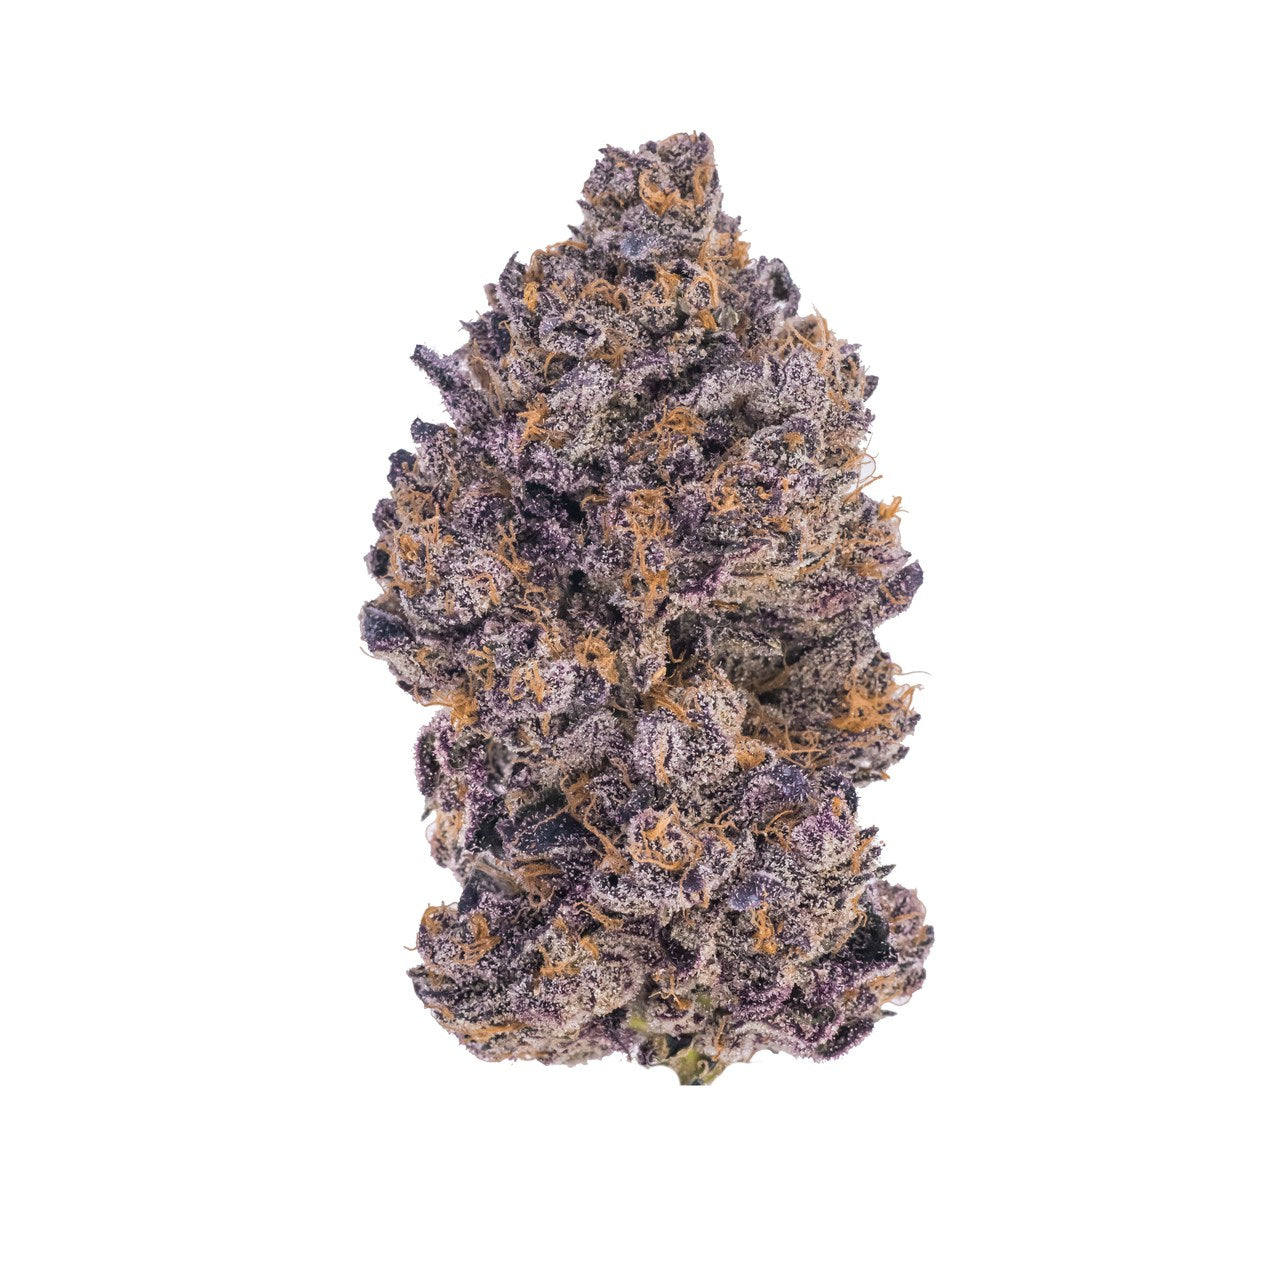 A nug of cannabis flower from the Black Truffle strain sits against a white background.